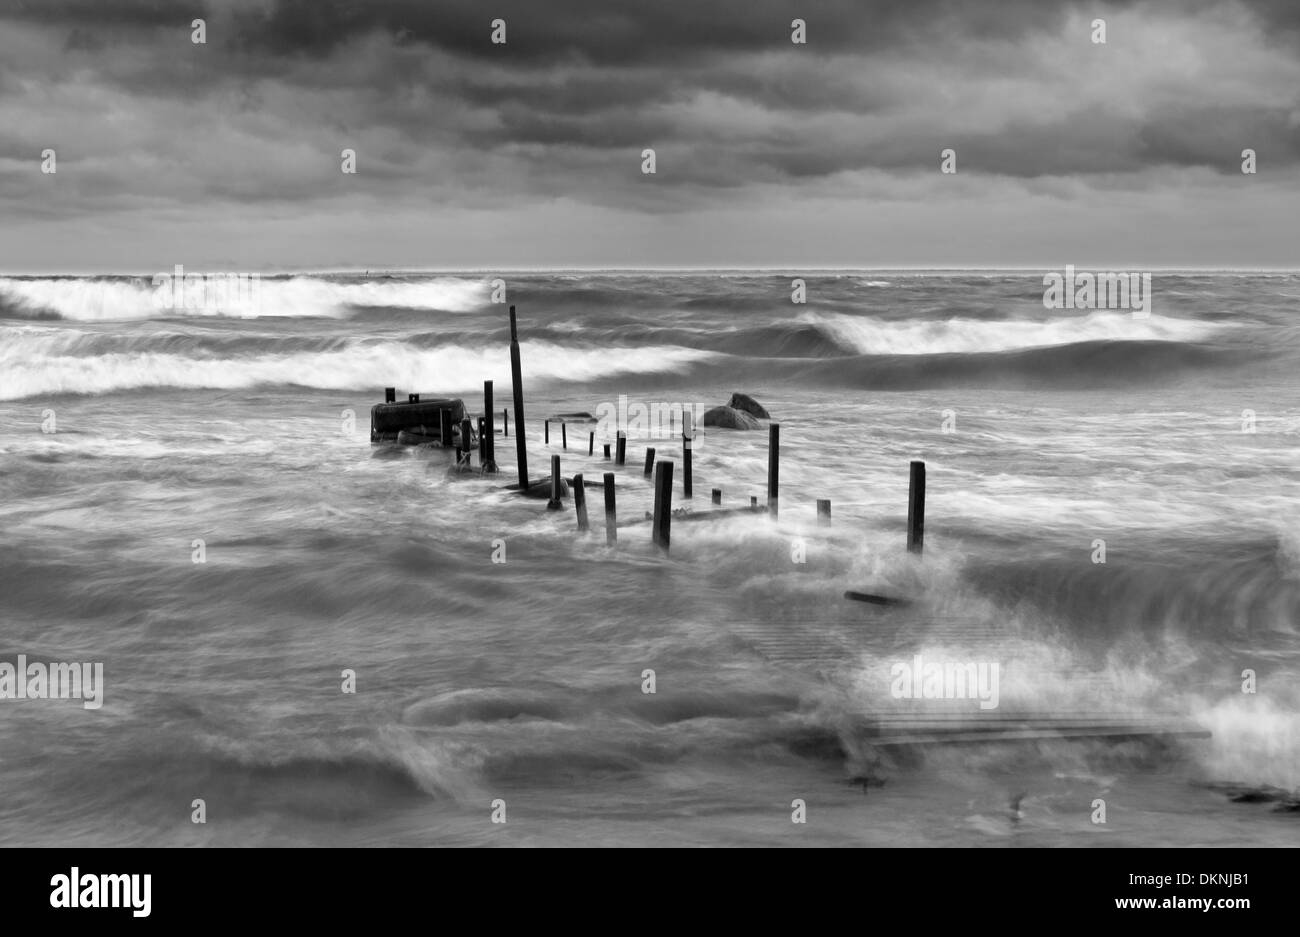 Wooden bridge in a stormy and wavy sea Stock Photo